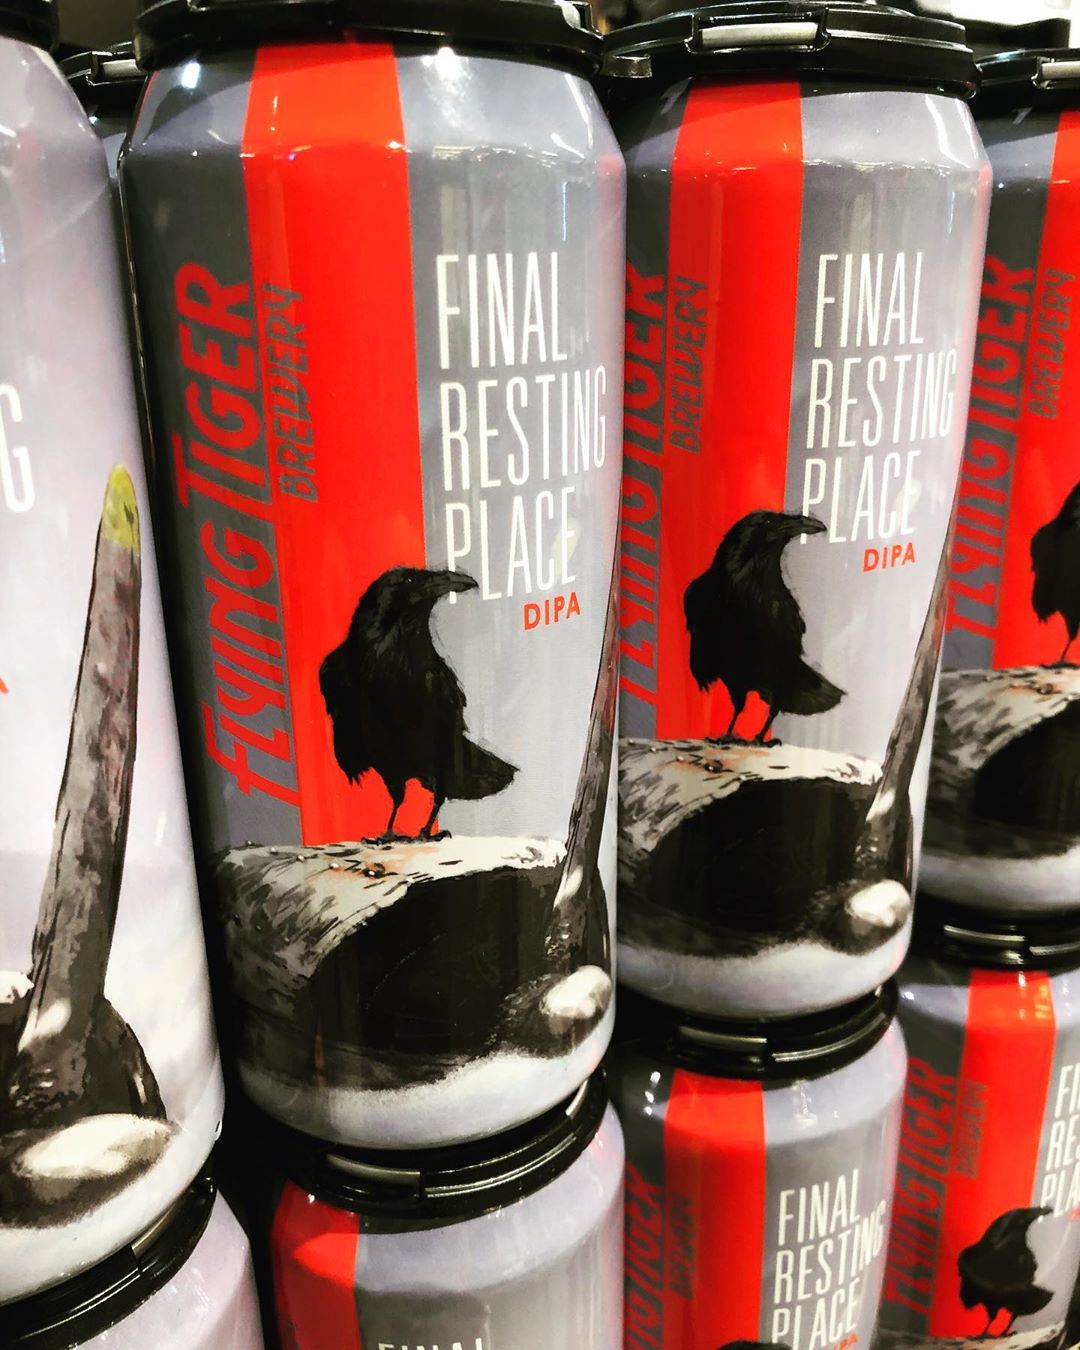 @flyingtigerbrewery Final Resting Place double IPA is back in stock at our Perkins Rd location!…